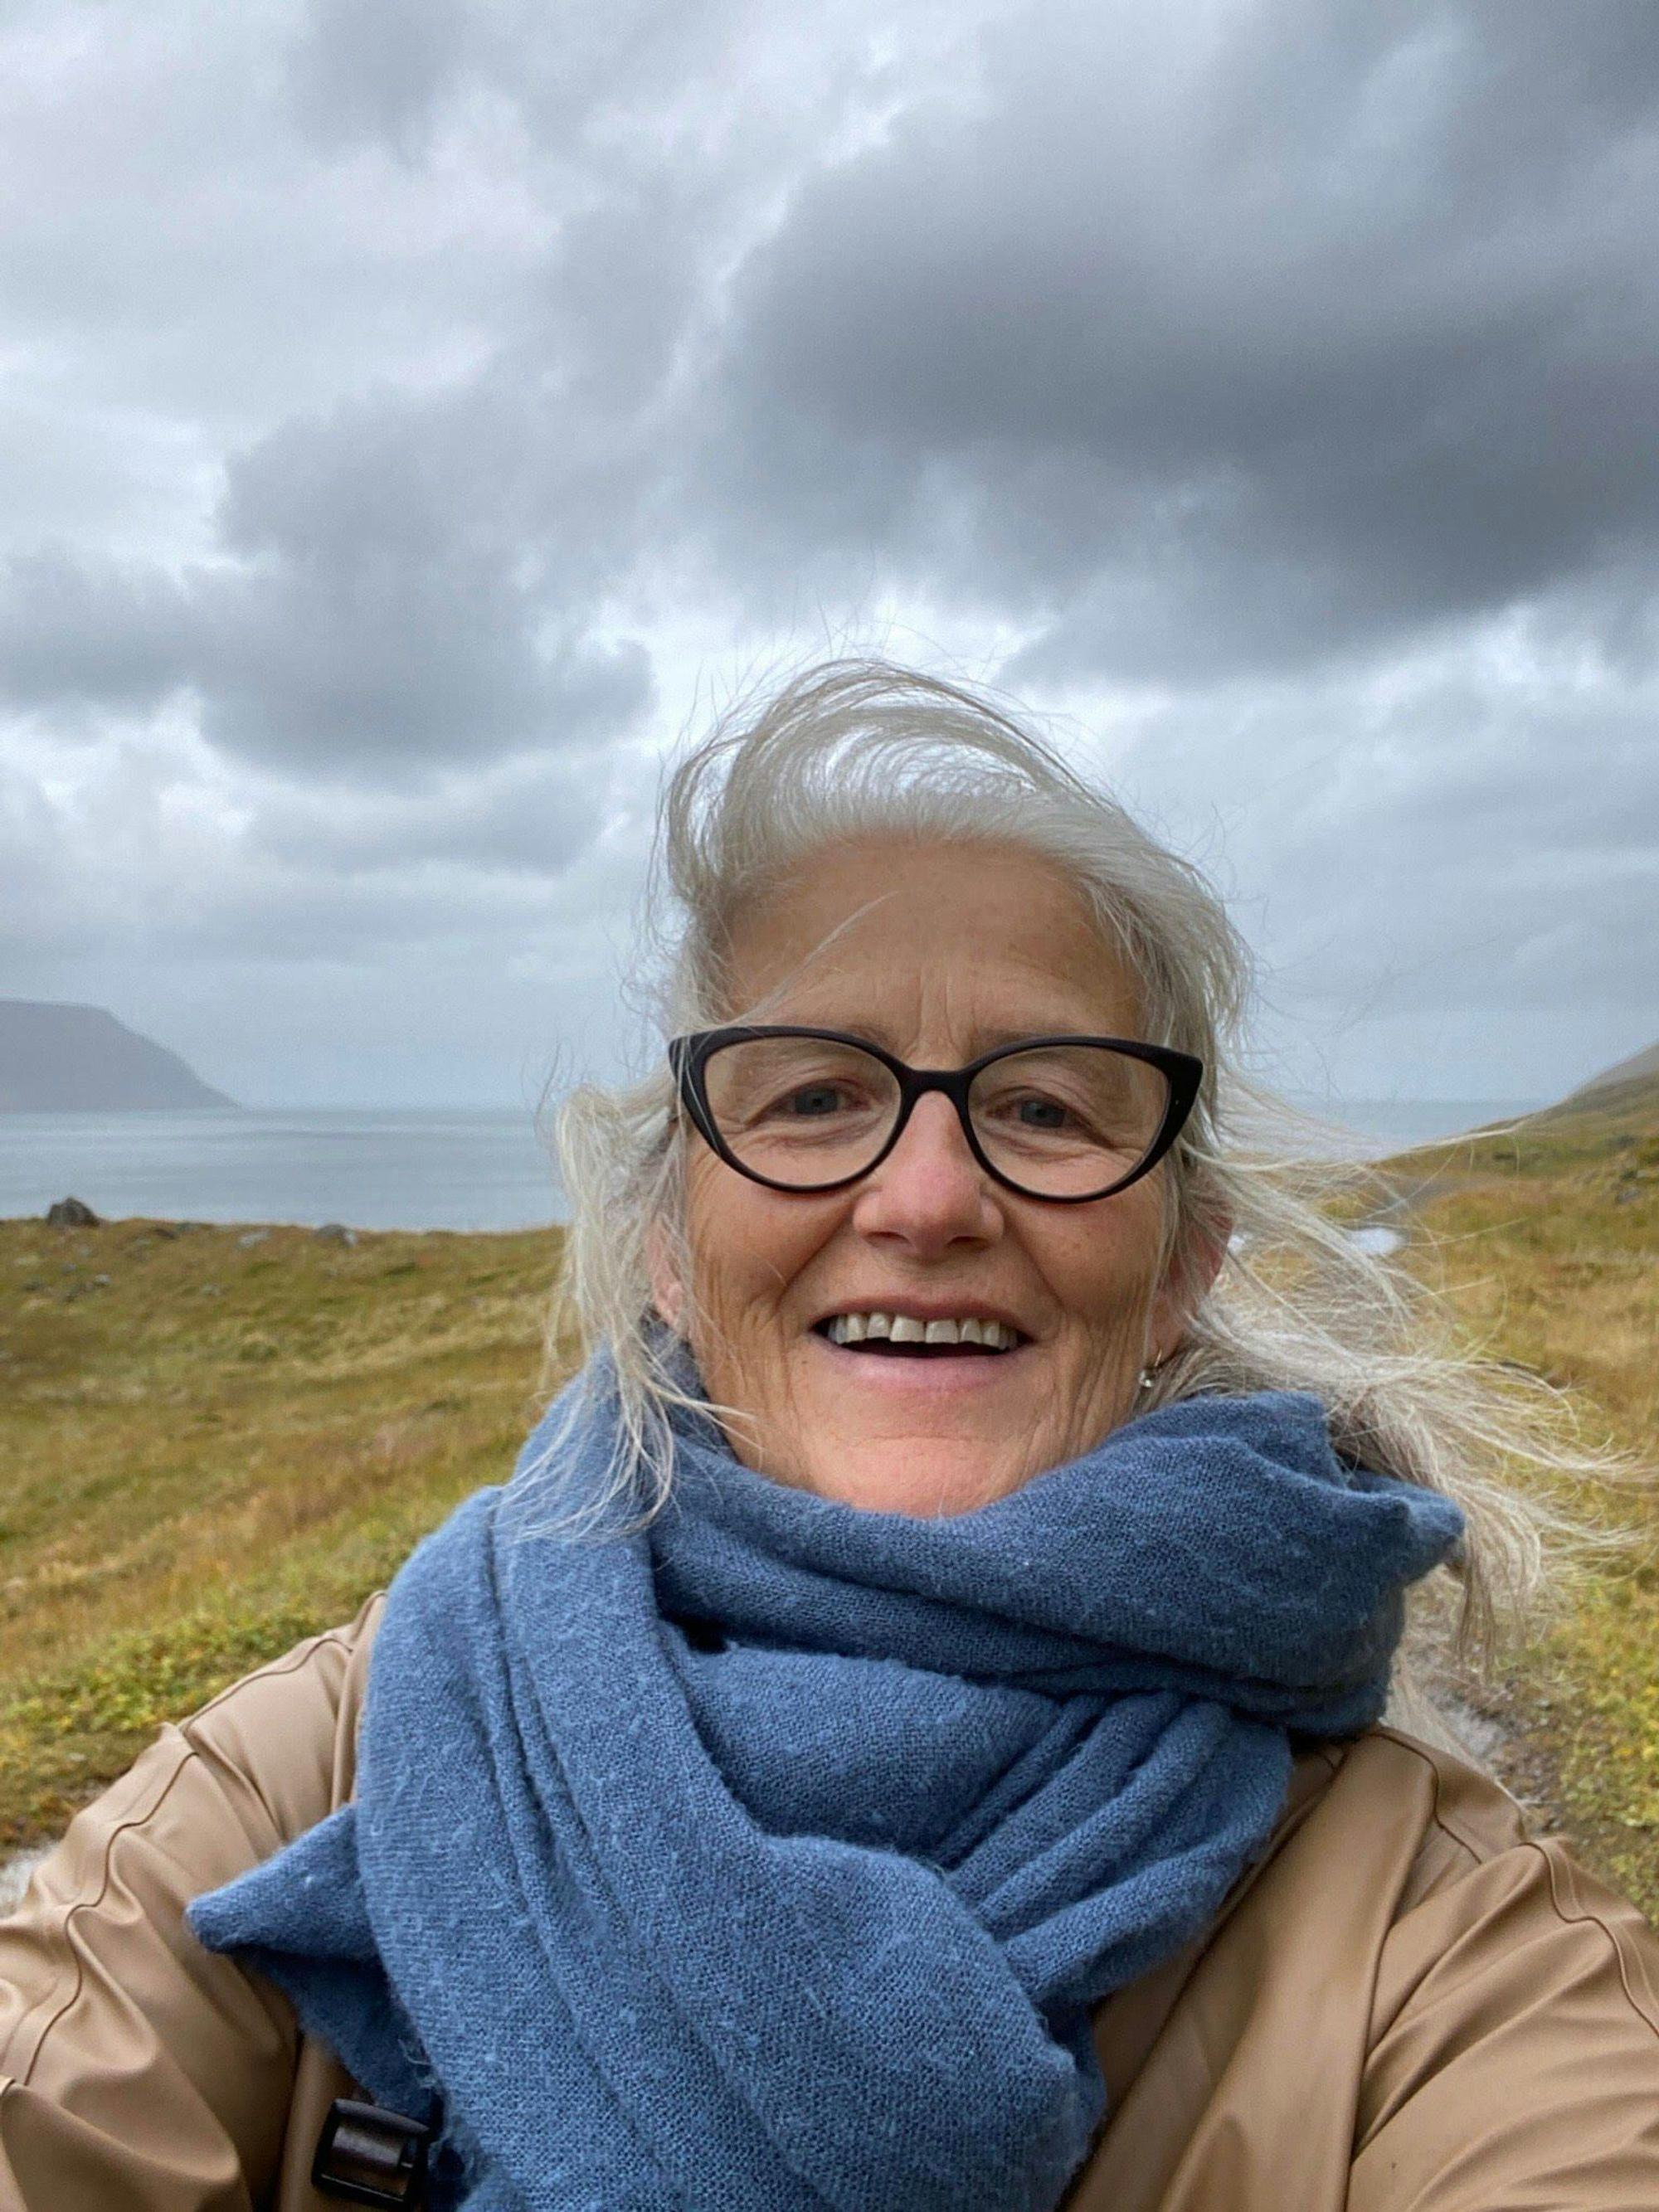 A close-up photo of a smiling woman with gray hair and glasses with a windswept landscape